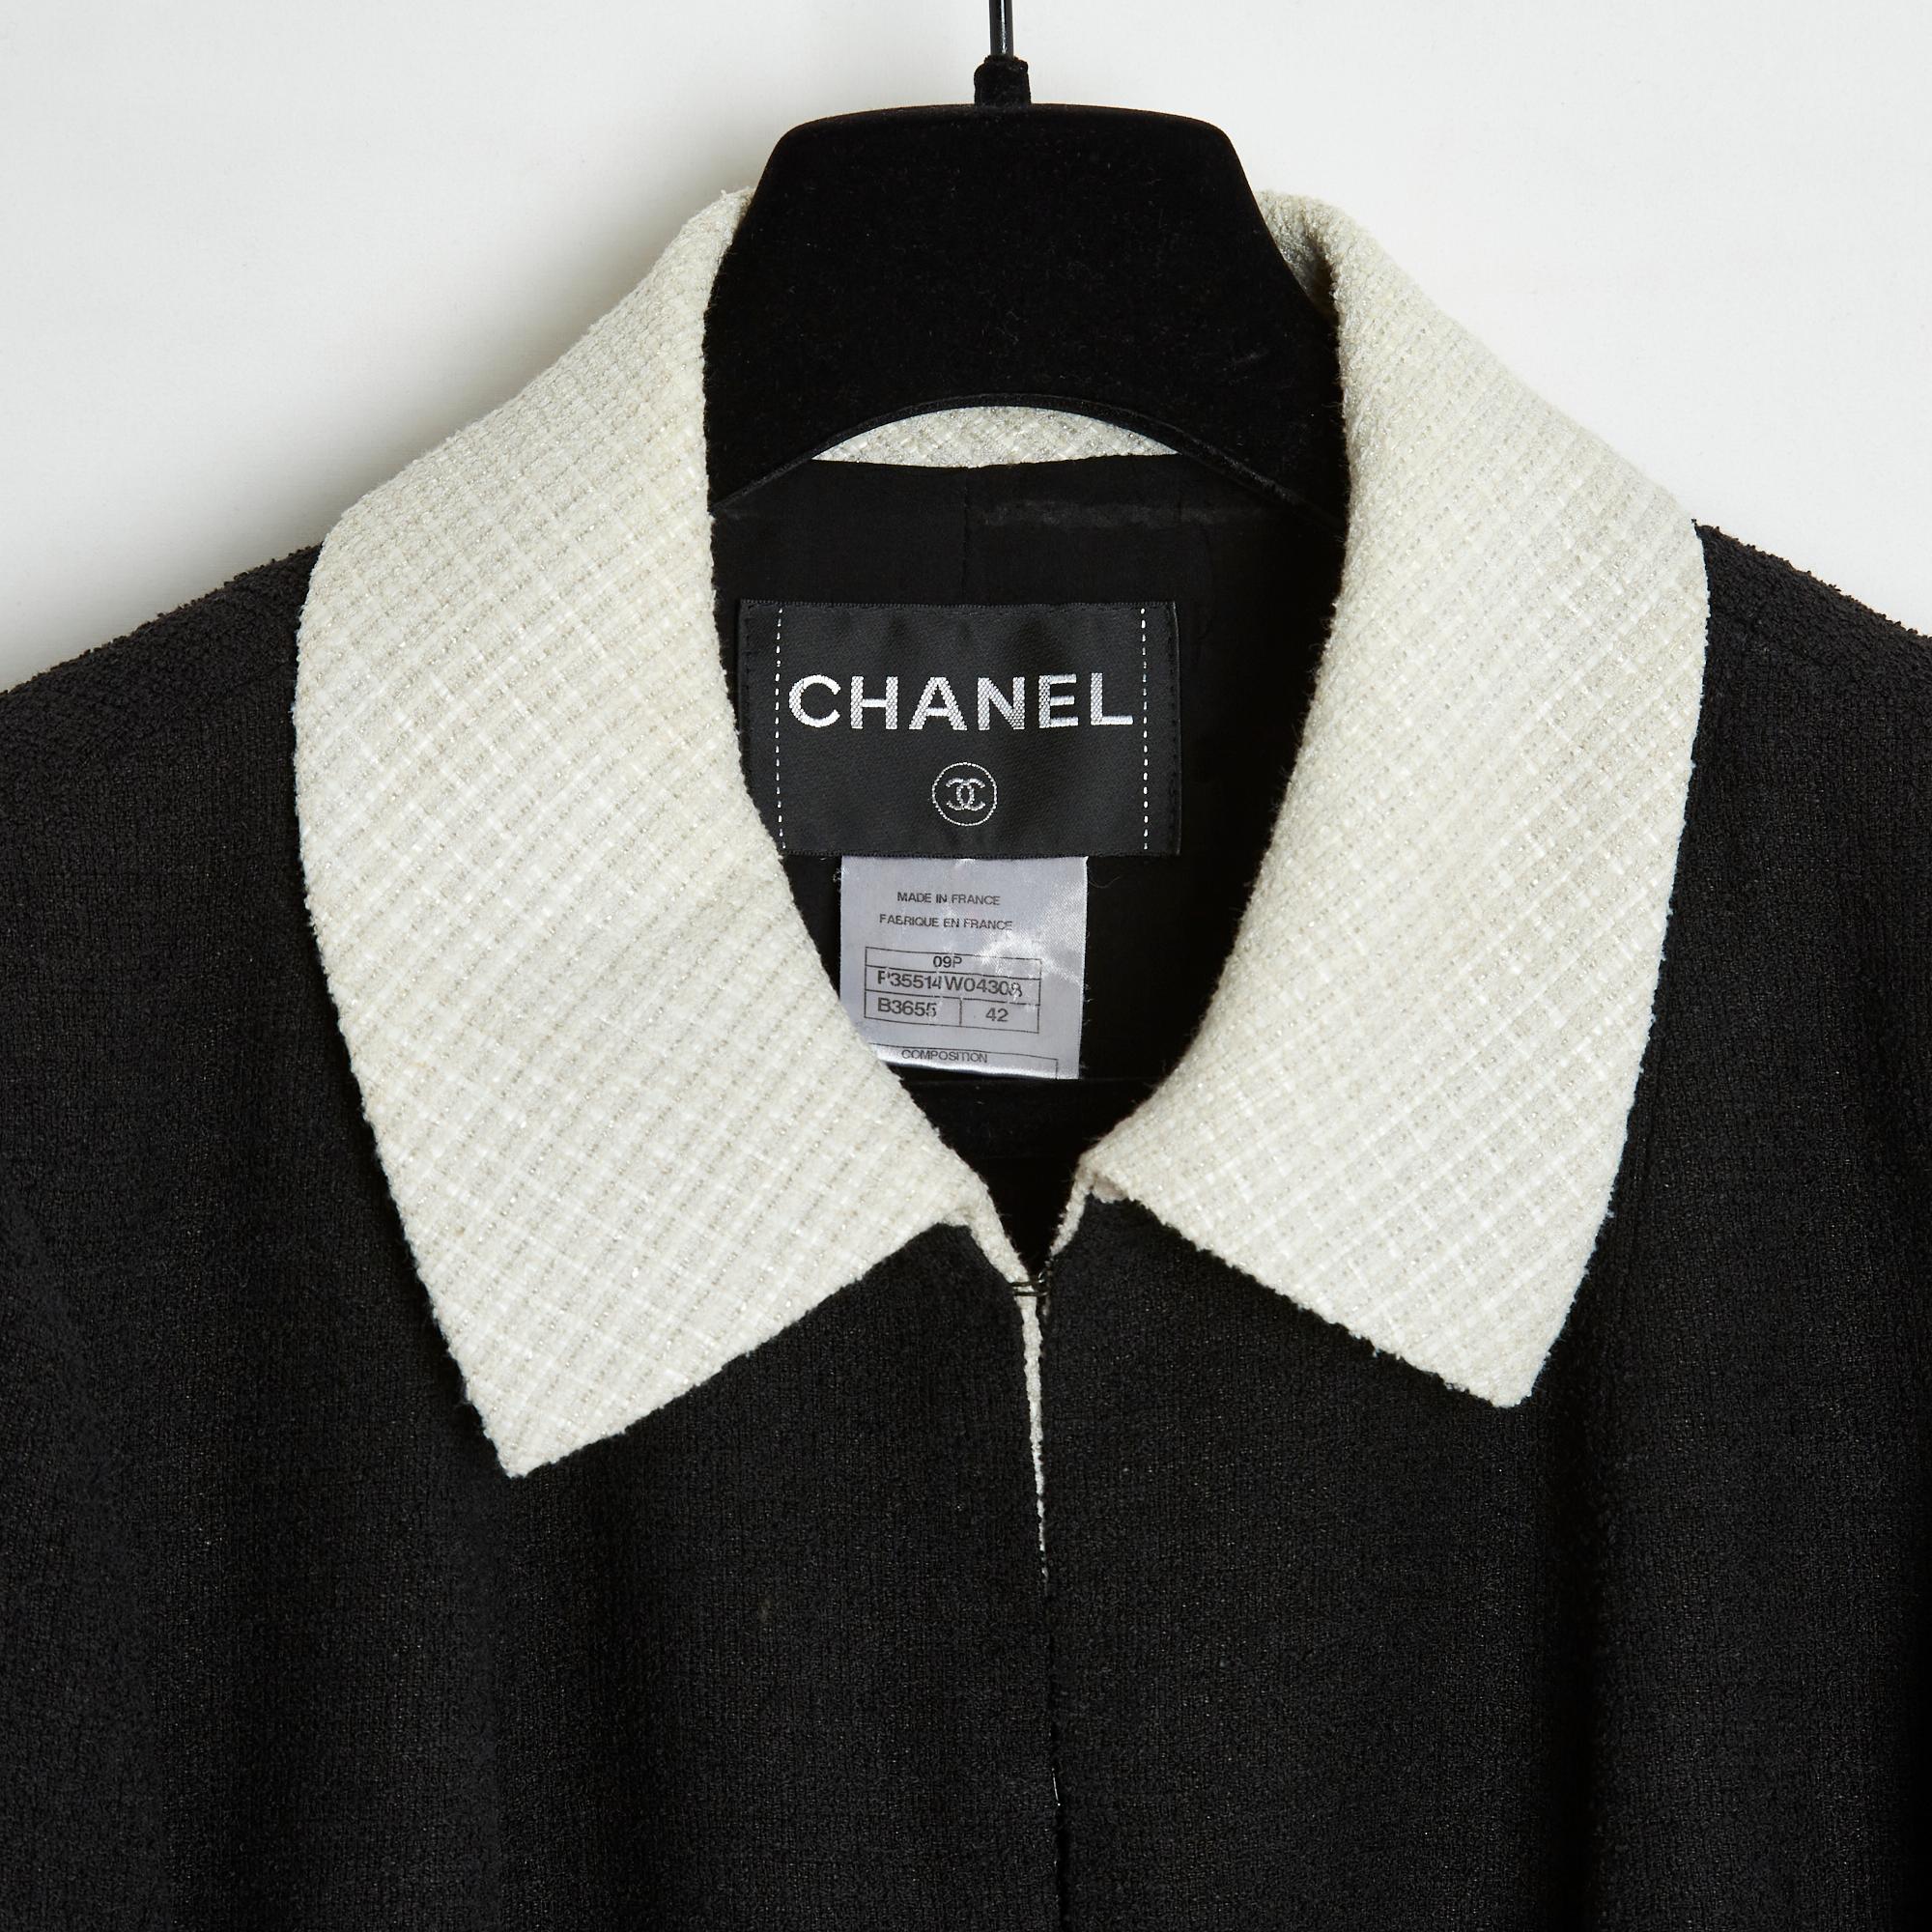 Chanel Spring/Summer 2009 collection jacket in black linen, silk and wool mat, straight cut, 2 pockets under the chest, collar and cuffs contrasting in shimmering ecru terry cloth (polyamide and viscose), 3 front fastening hooks (and a 4th small